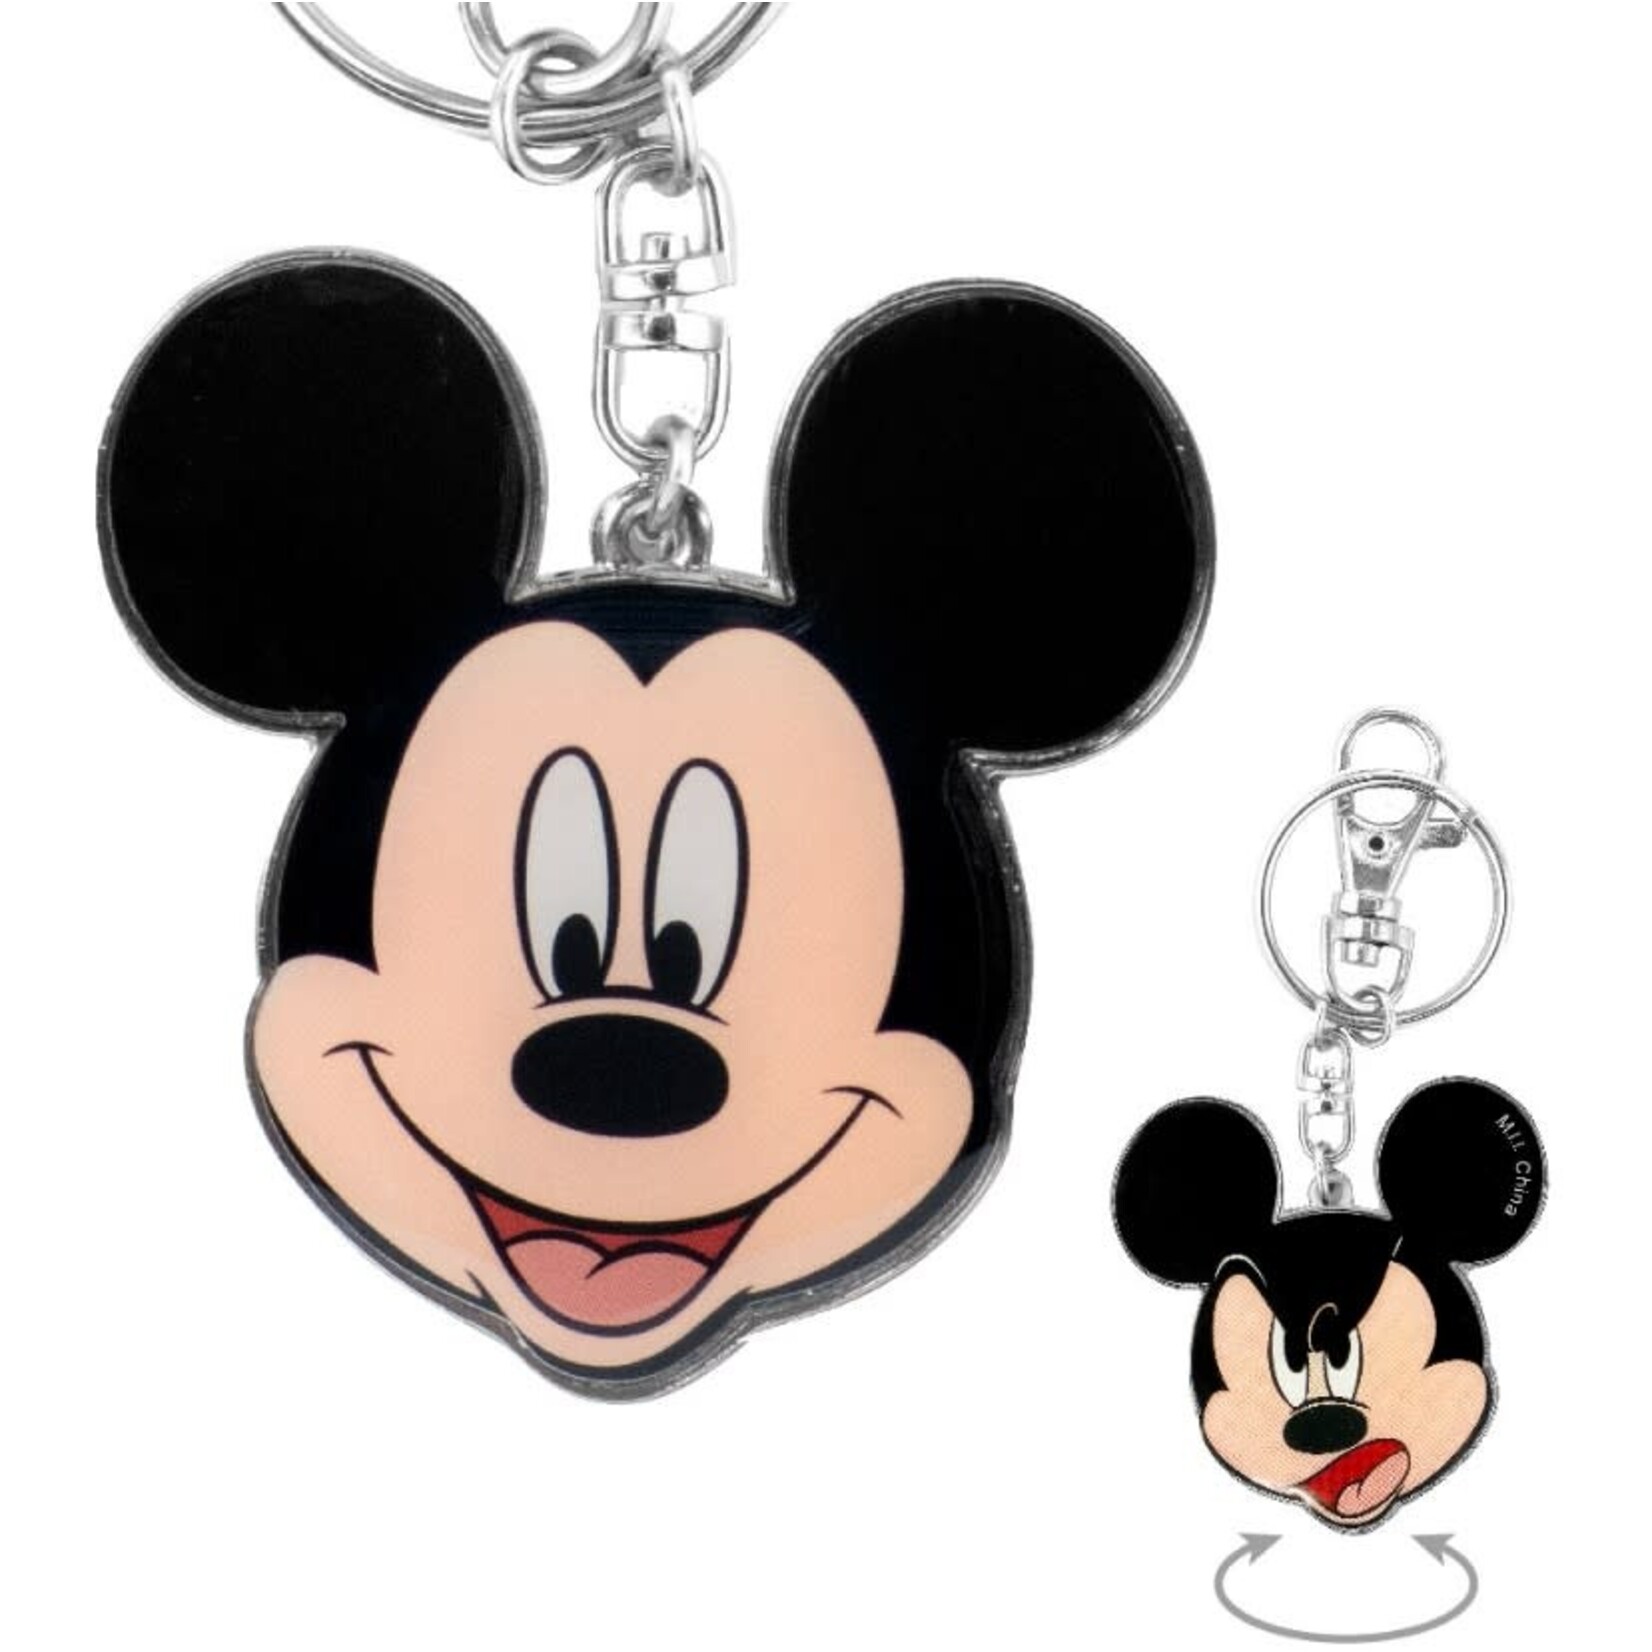 Disney Disney - Double Sided Mickey Mouse Pewter Key Ring